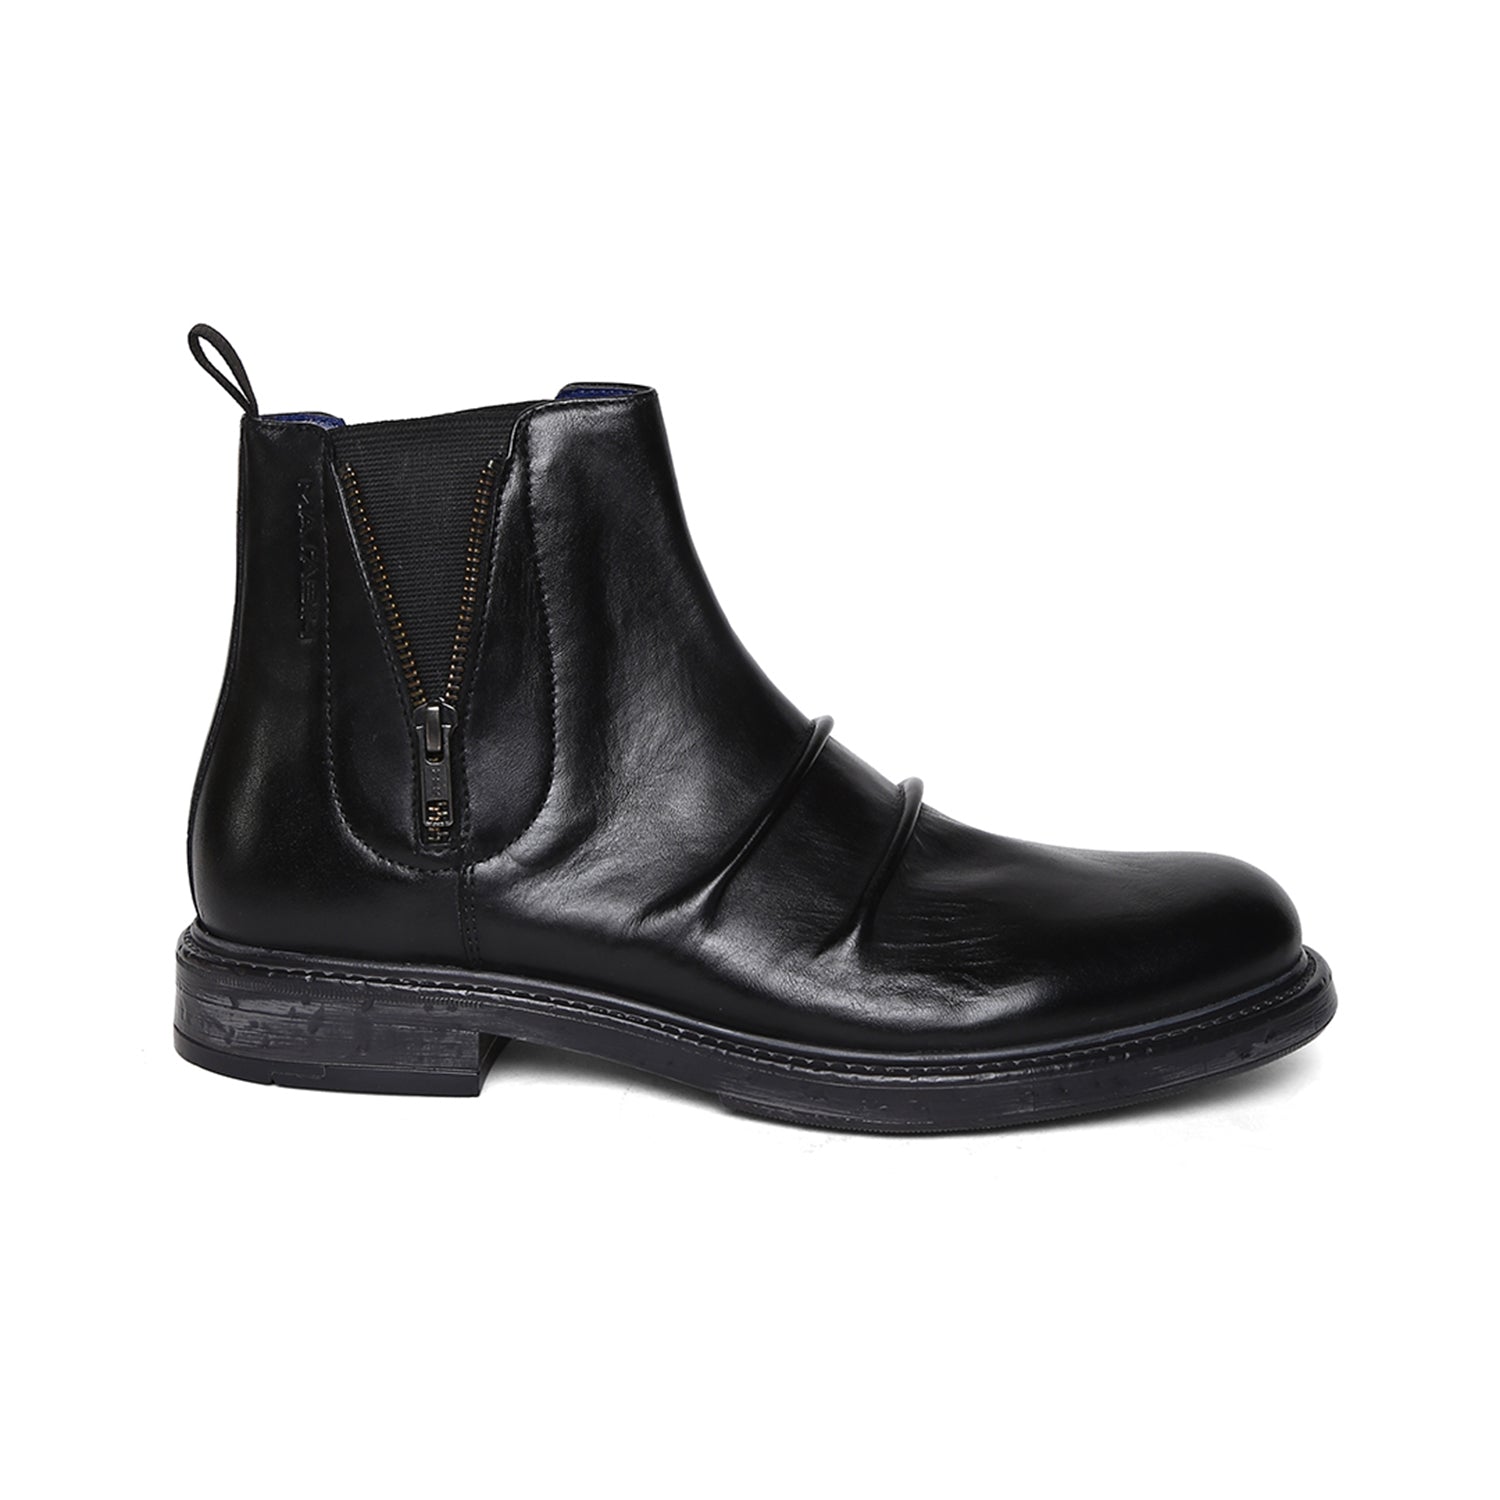 Masabih Genuine Leather Black Casual Chelsea Boots with Zipper for Men